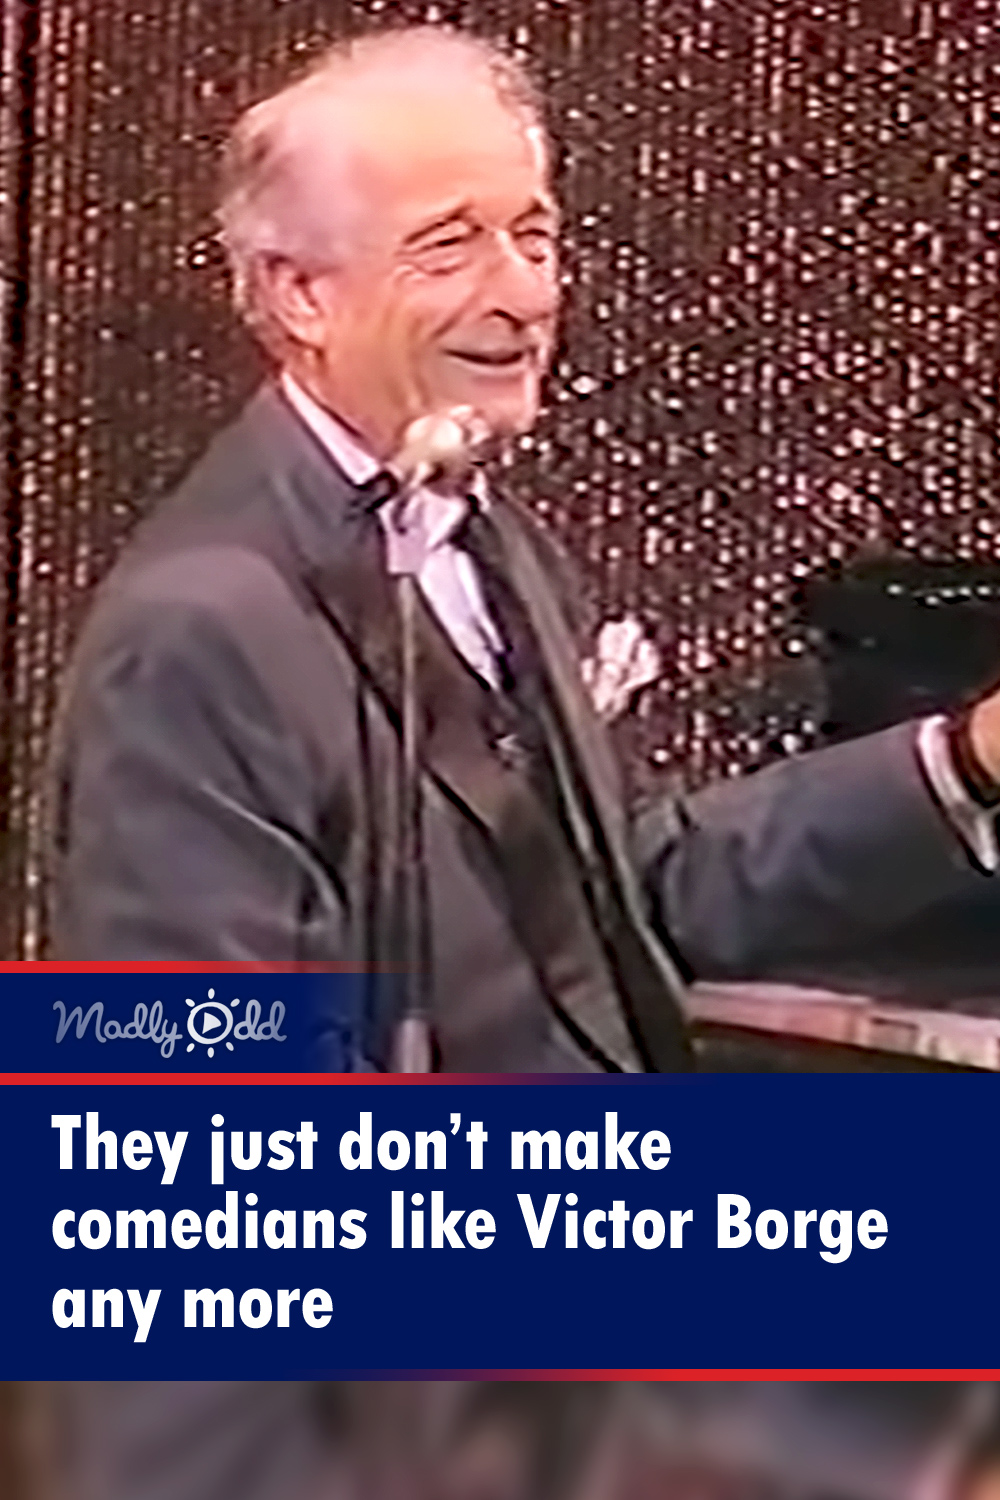 They just don’t make comedians like Victor Borge any more